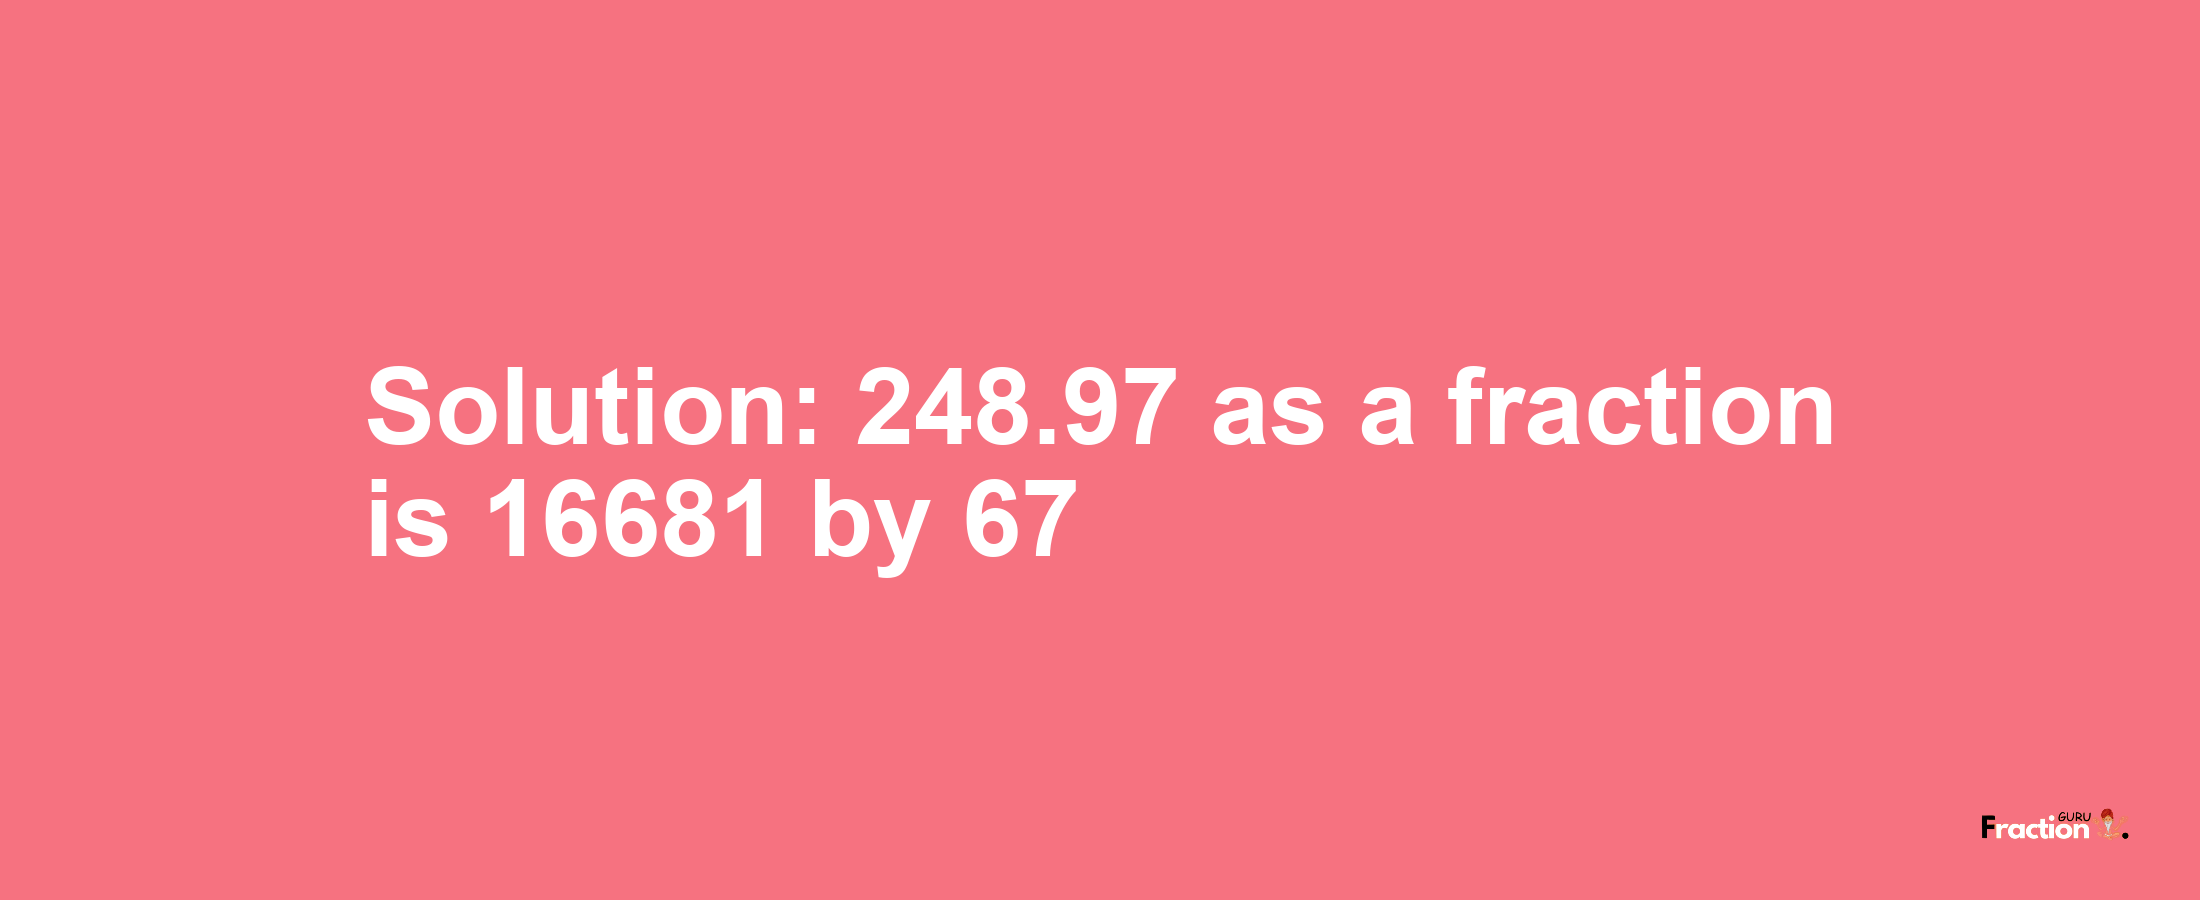 Solution:248.97 as a fraction is 16681/67